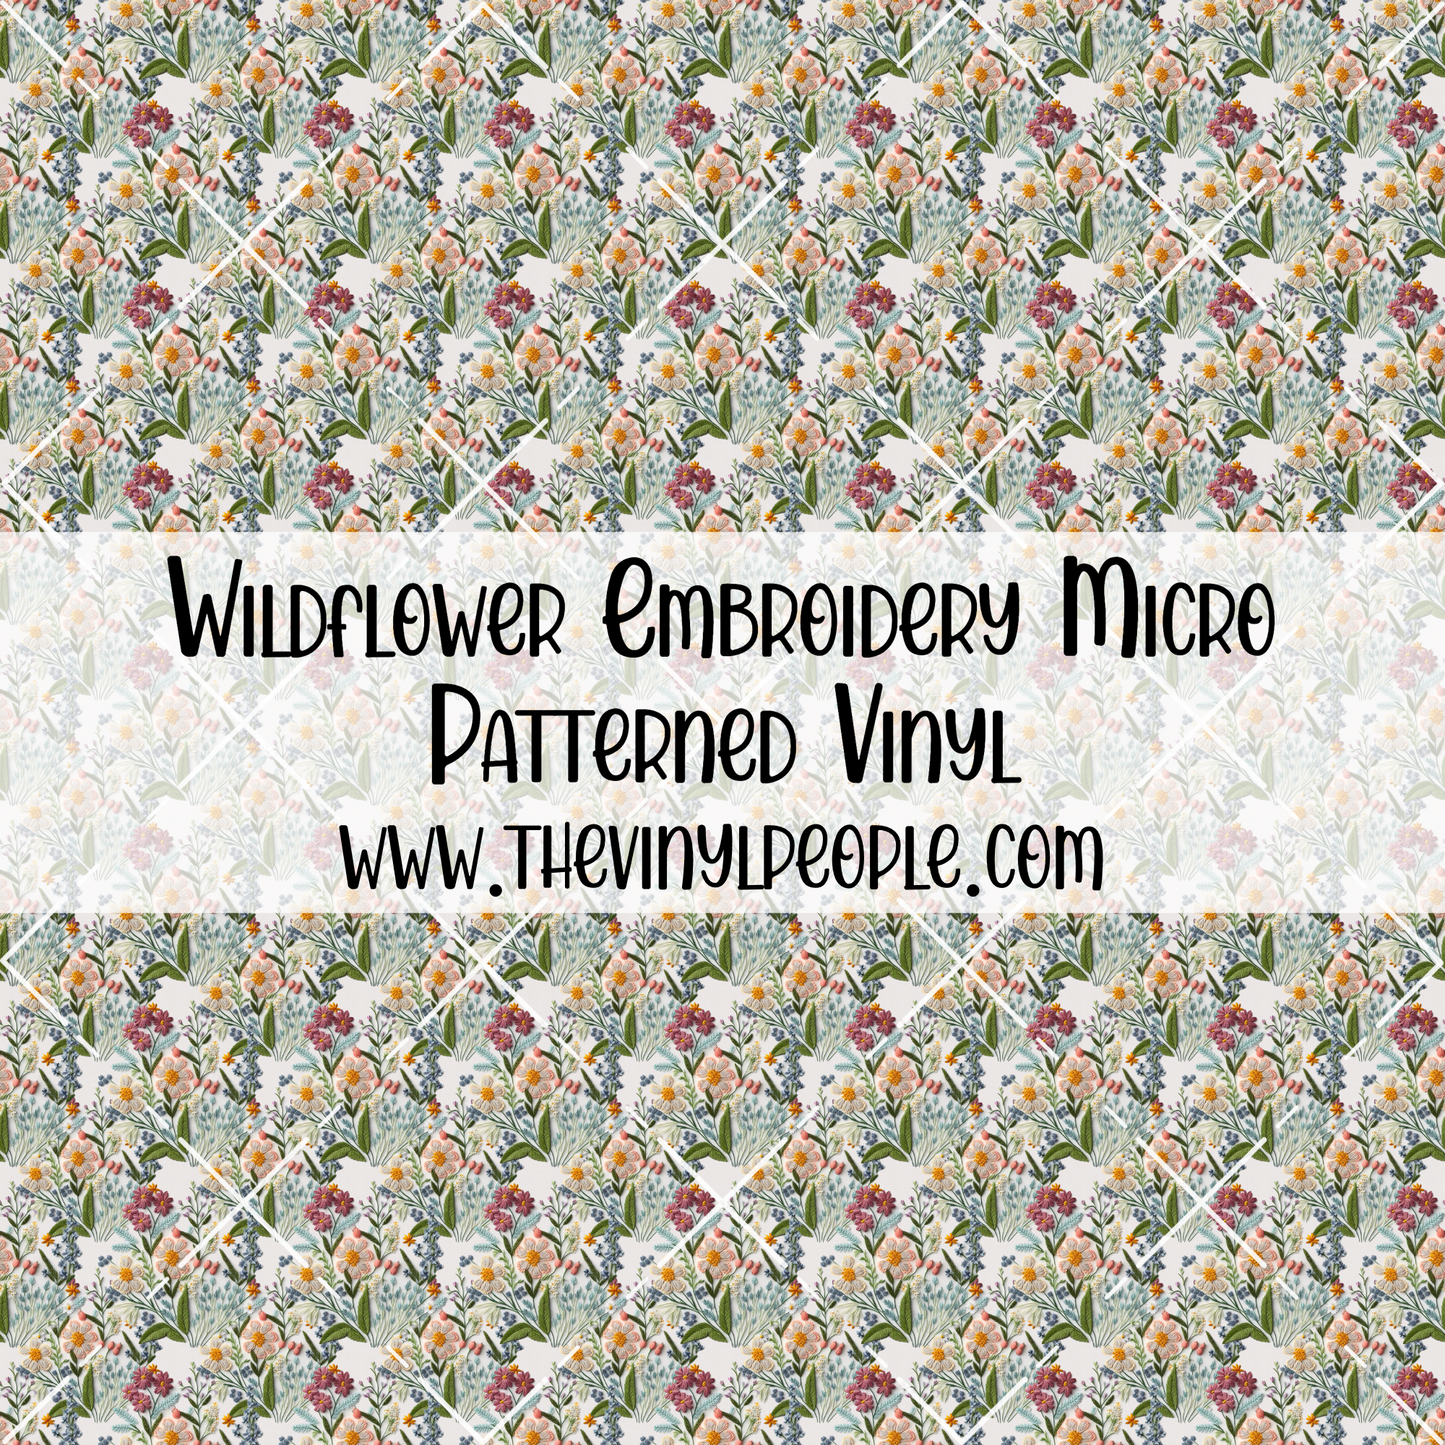 Wildflower Embroidery Patterned Vinyl